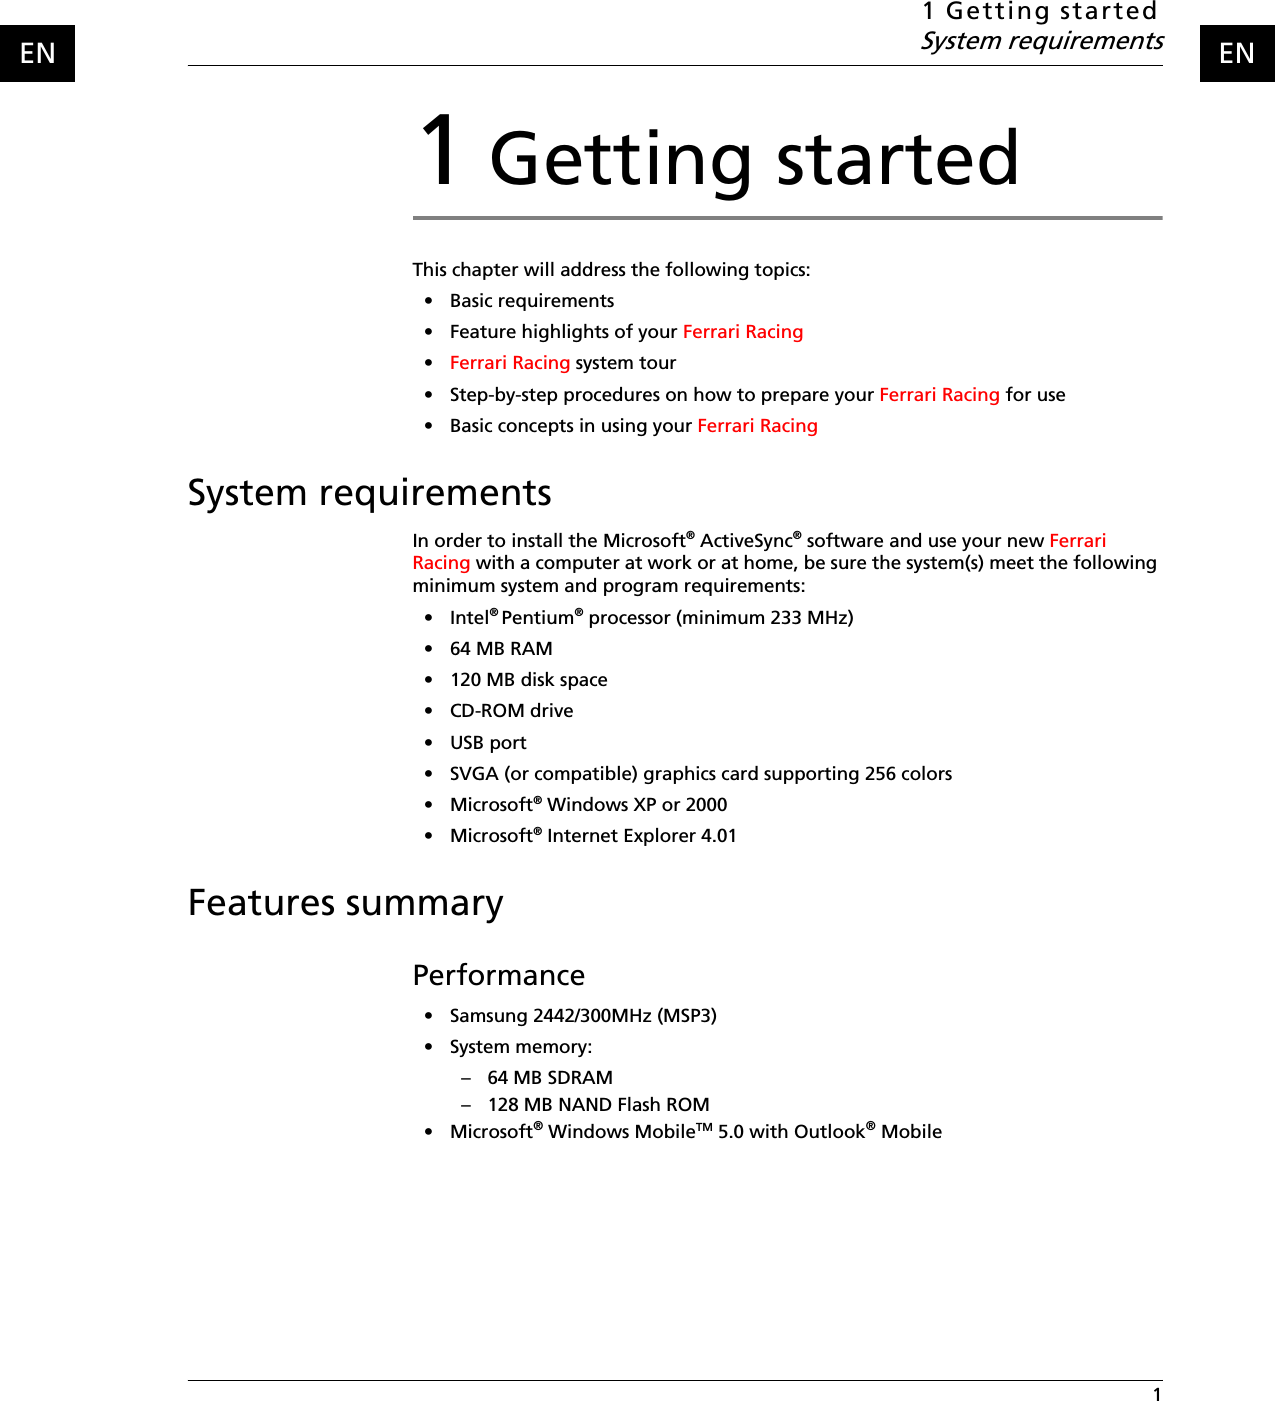 1 Getting startedSystem requirements 1ENEN1 Getting startedThis chapter will address the following topics:• Basic requirements• Feature highlights of your Ferrari Racing •Ferrari Racing system tour • Step-by-step procedures on how to prepare your Ferrari Racing for use• Basic concepts in using your Ferrari RacingSystem requirementsIn order to install the Microsoft® ActiveSync® software and use your new Ferrari Racing with a computer at work or at home, be sure the system(s) meet the following minimum system and program requirements:•Intel® Pentium® processor (minimum 233 MHz)• 64 MB RAM• 120 MB disk space•CD-ROM drive•USB port• SVGA (or compatible) graphics card supporting 256 colors• Microsoft® Windows XP or 2000• Microsoft® Internet Explorer 4.01Features summaryPerformance• Samsung 2442/300MHz (MSP3)• System memory:– 64 MB SDRAM – 128 MB NAND Flash ROM • Microsoft® Windows MobileTM 5.0 with Outlook® Mobile